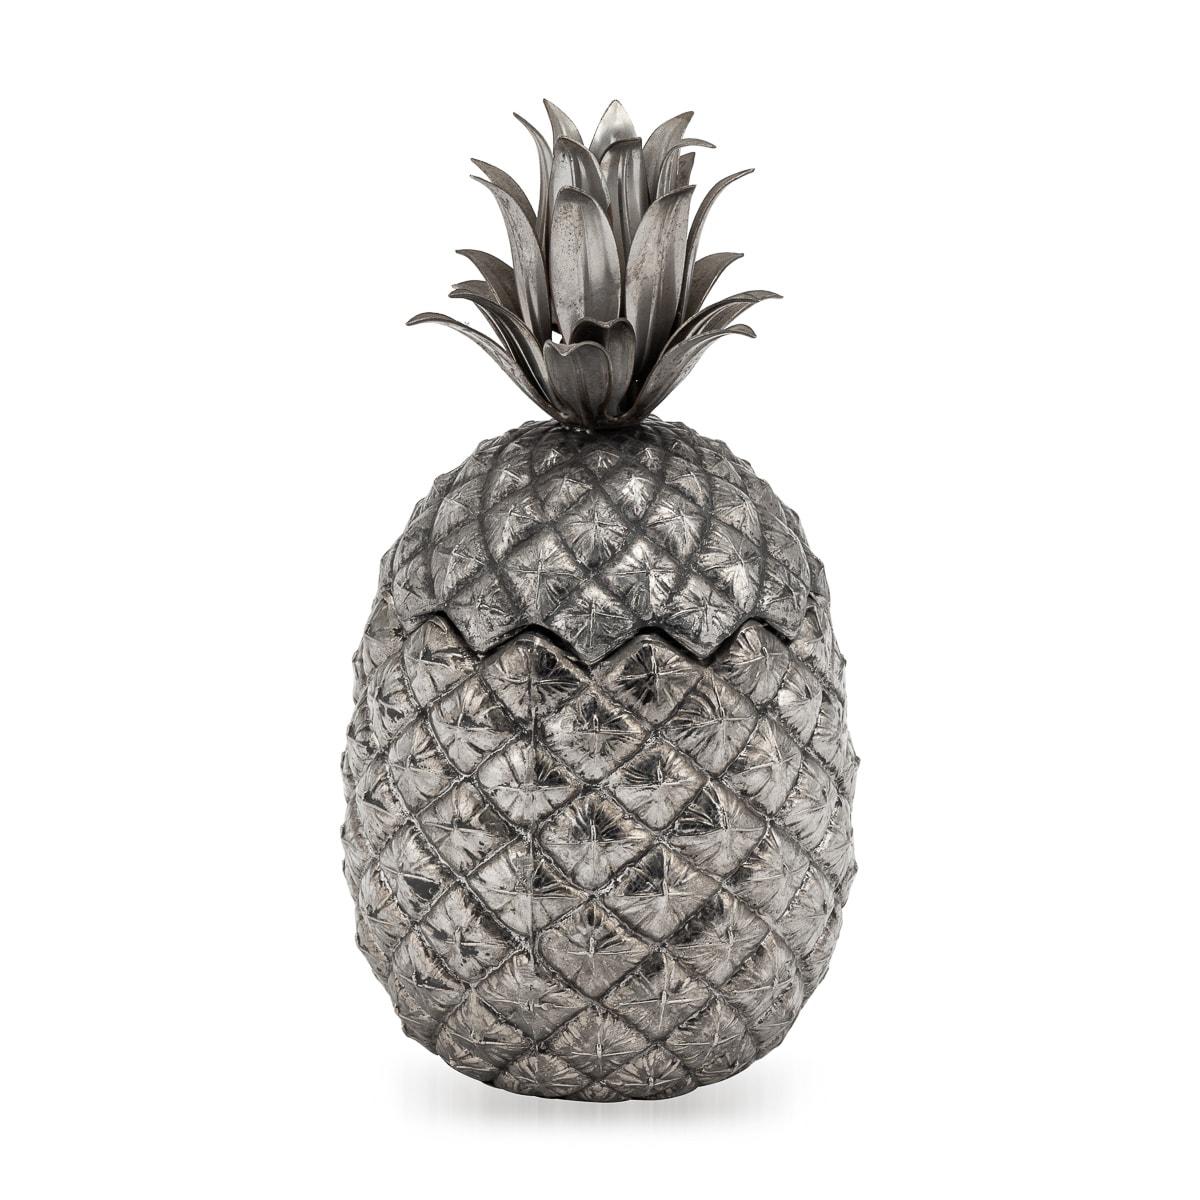 Art Deco 20th Century Silver Plated Pineapple Ice Bucket By Mauro Manetti, Italy c.1970